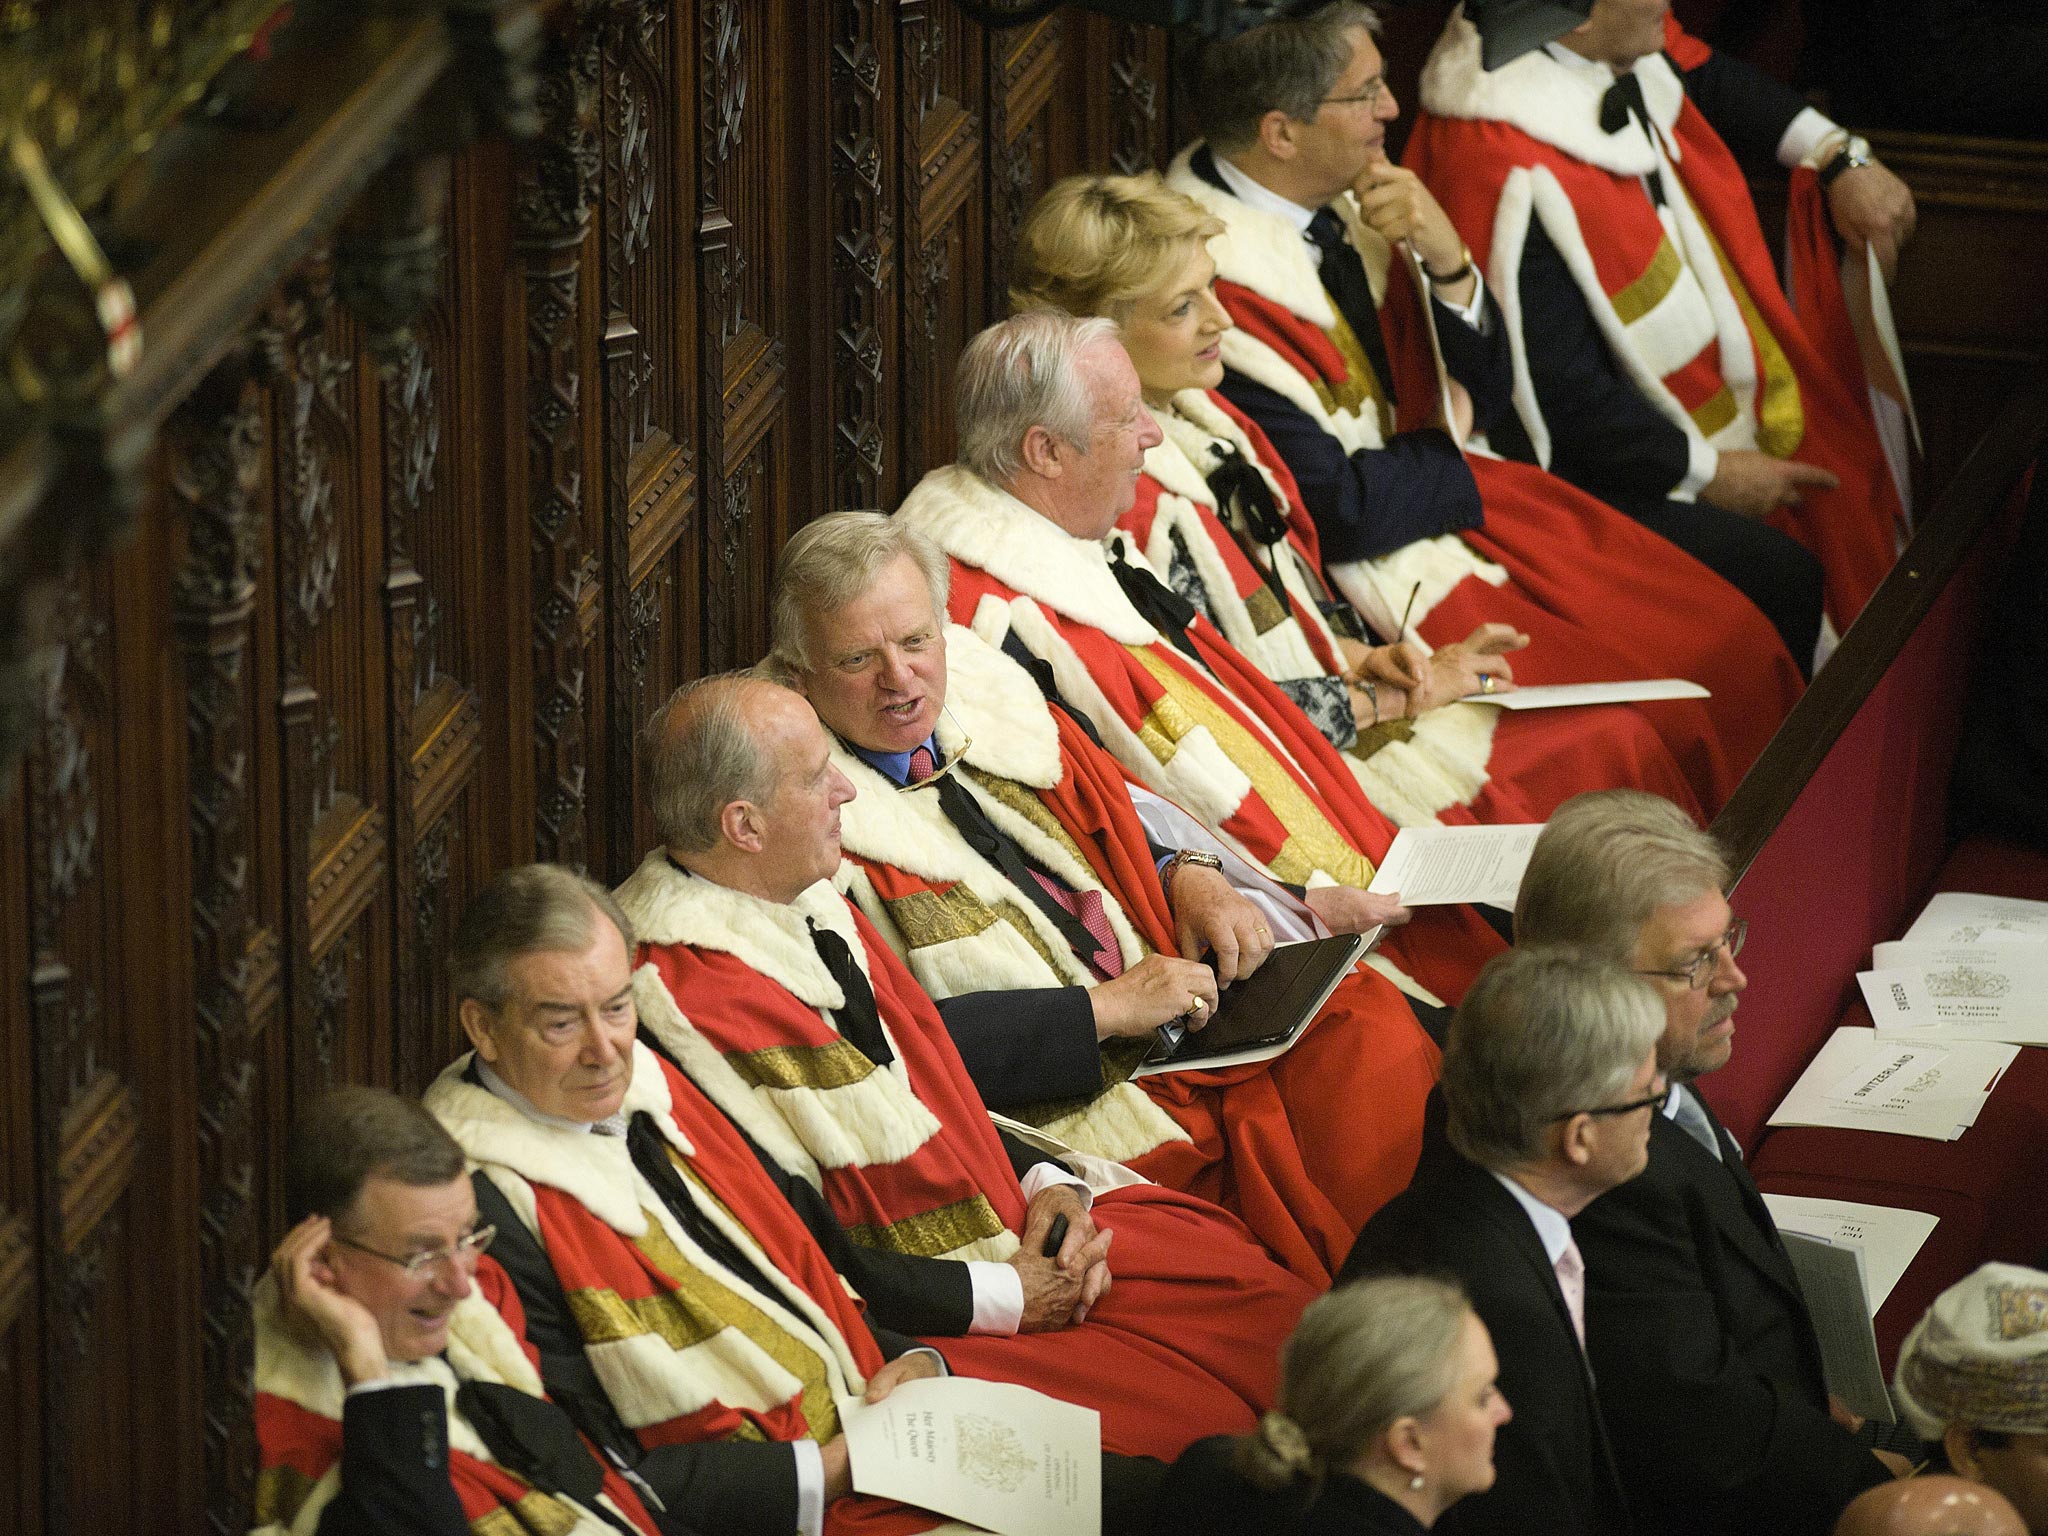 Peers will be banned from lobbying members of either the Commons or Lords ministers or government officials